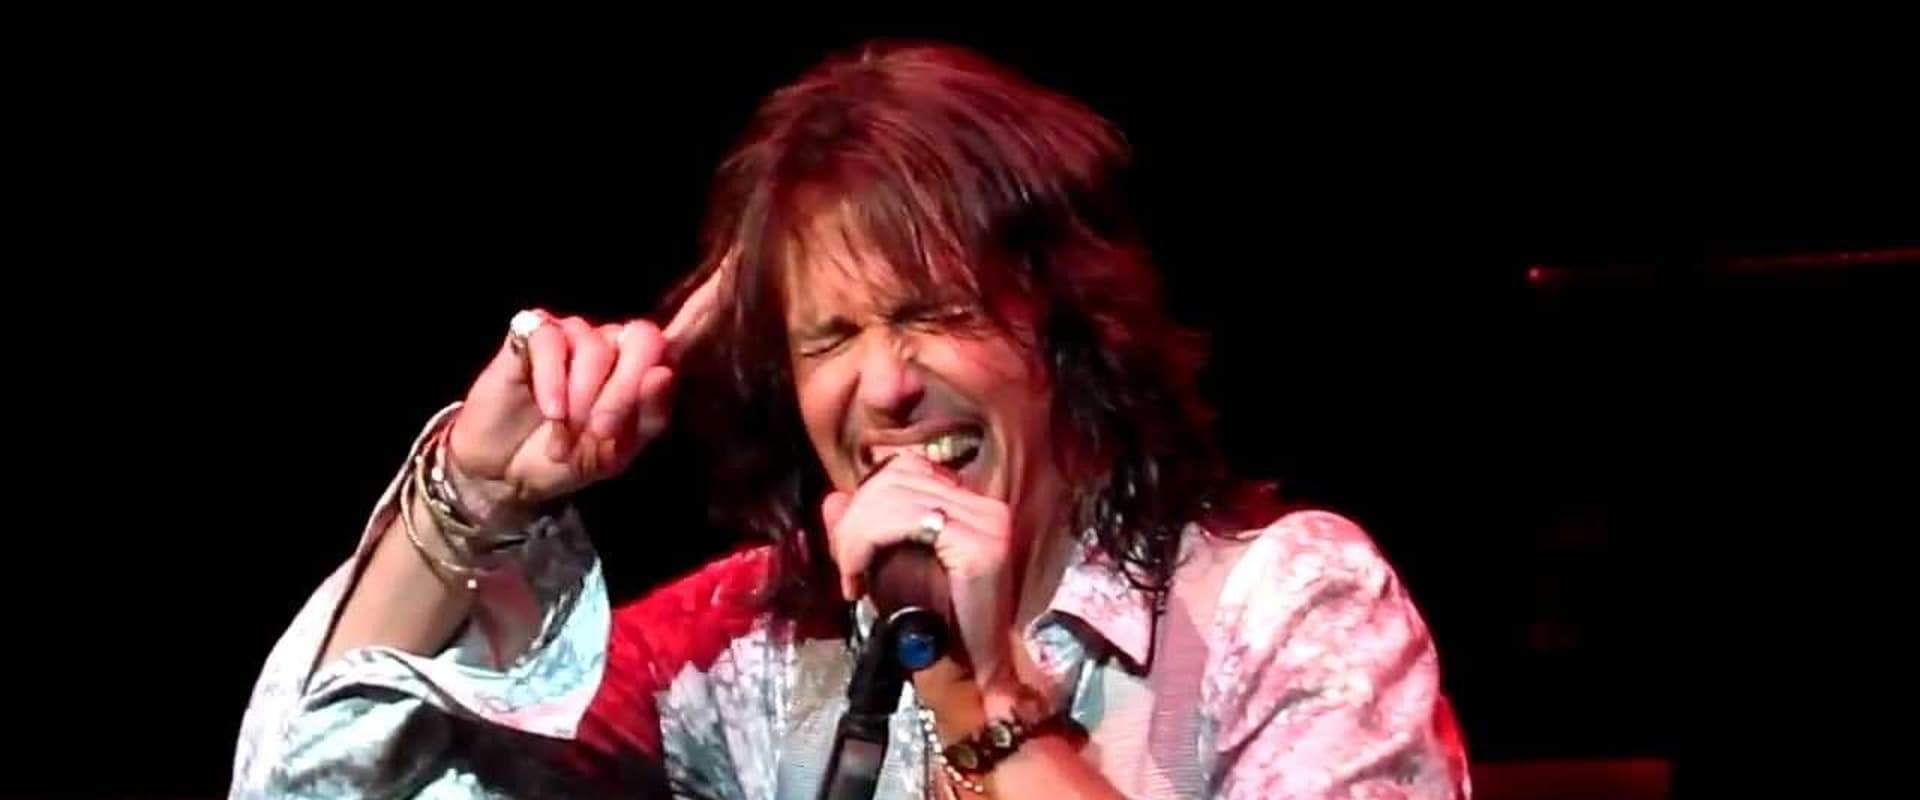 Foreigner - Live in Chicago